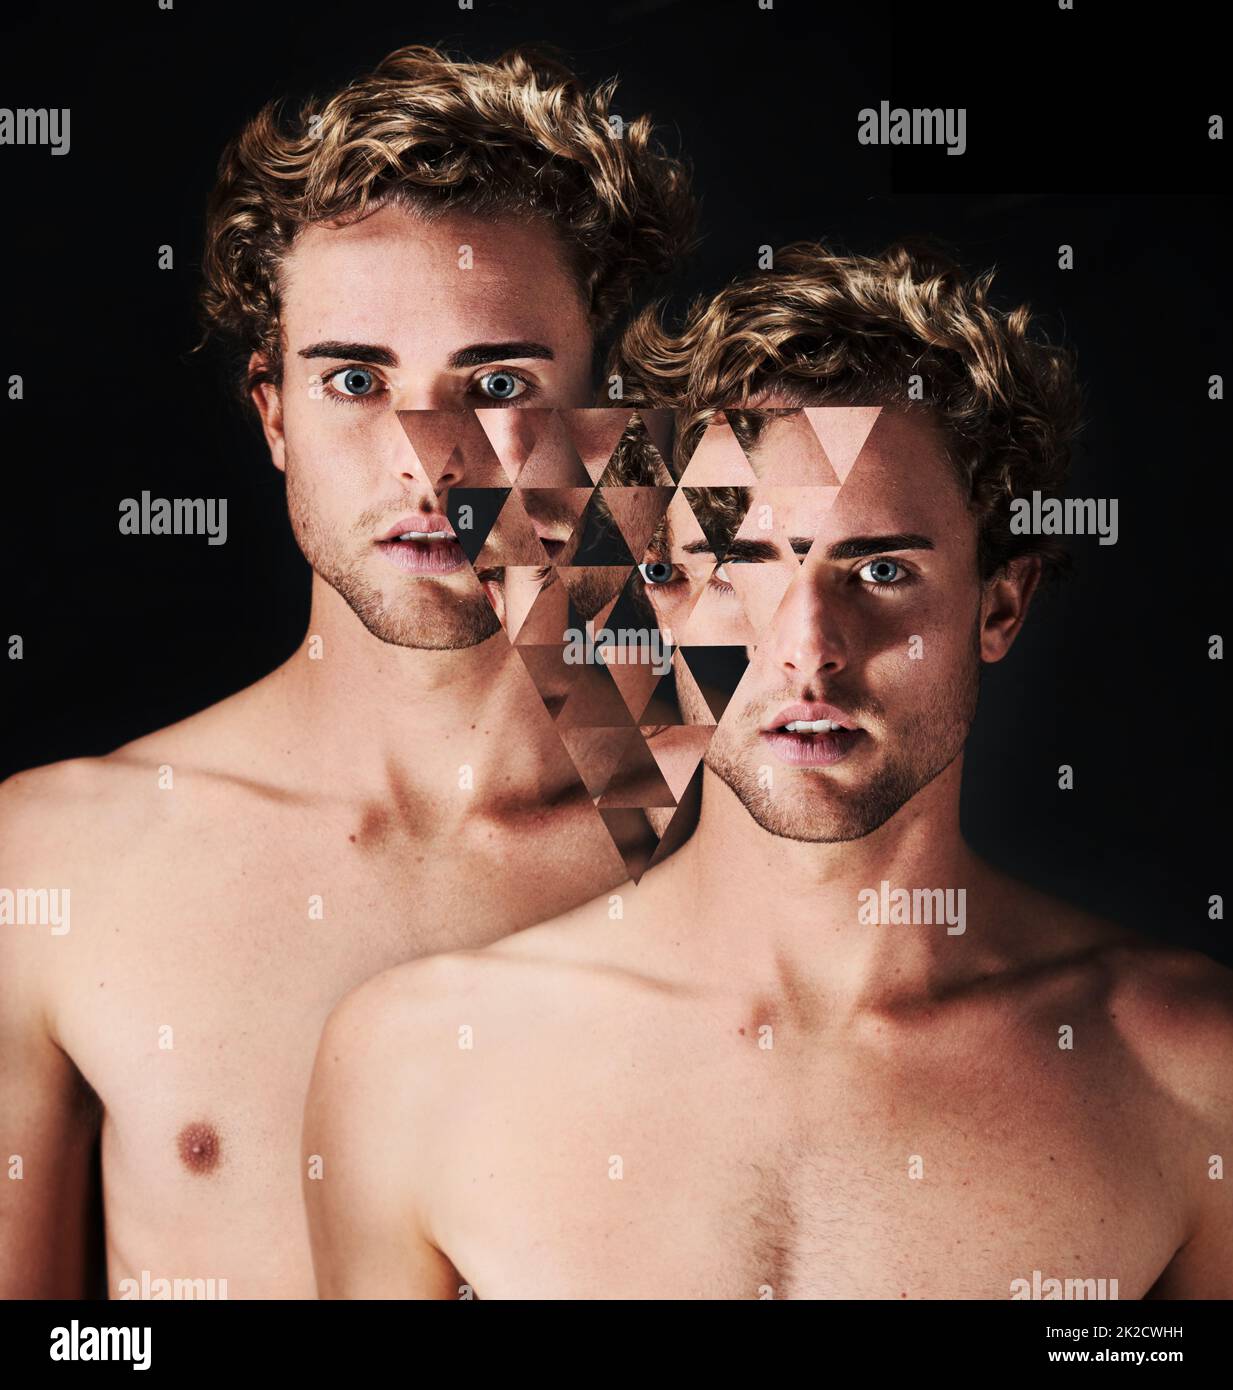 Split personality. Double image of a man with a pixelated triangle in the middle of the two. Stock Photo